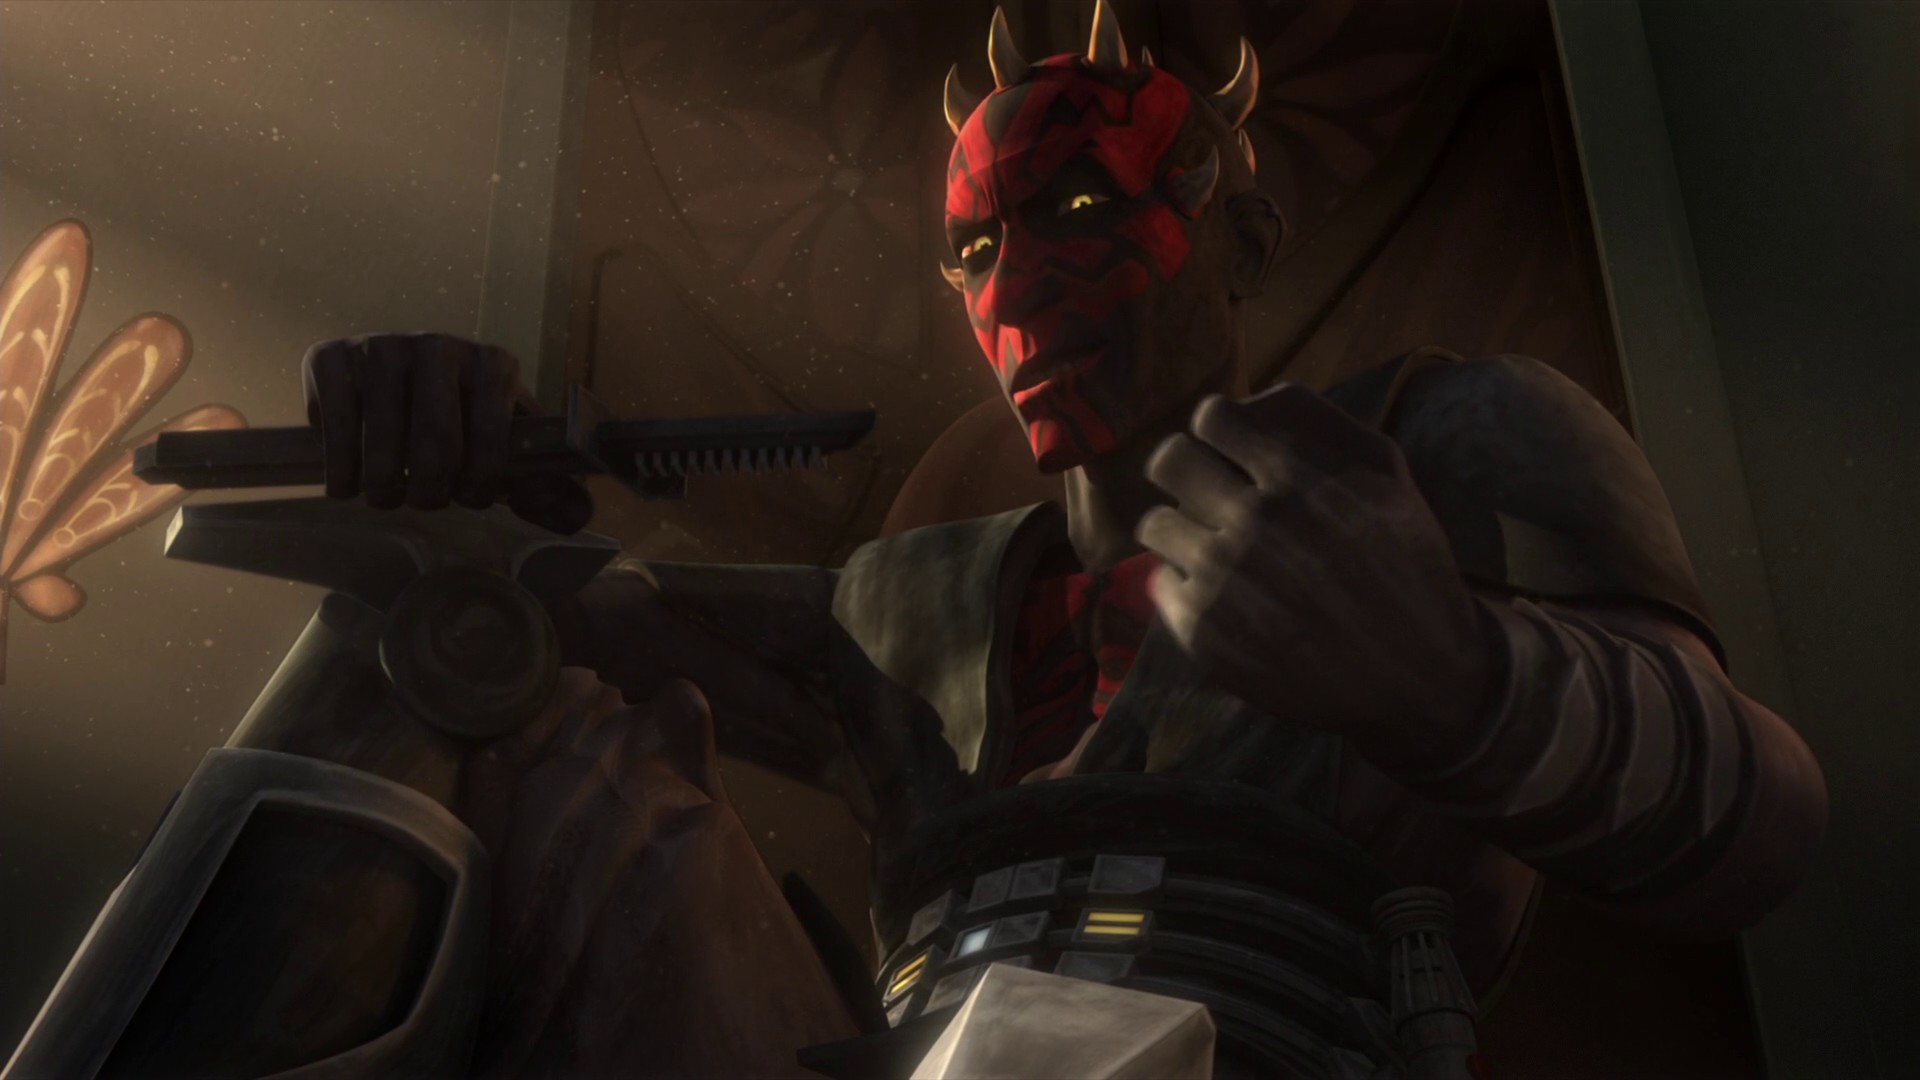 Darth Maul will have the usual force user nerf in these fights  (Choke,Grip,Mind tricks) everything else is fine